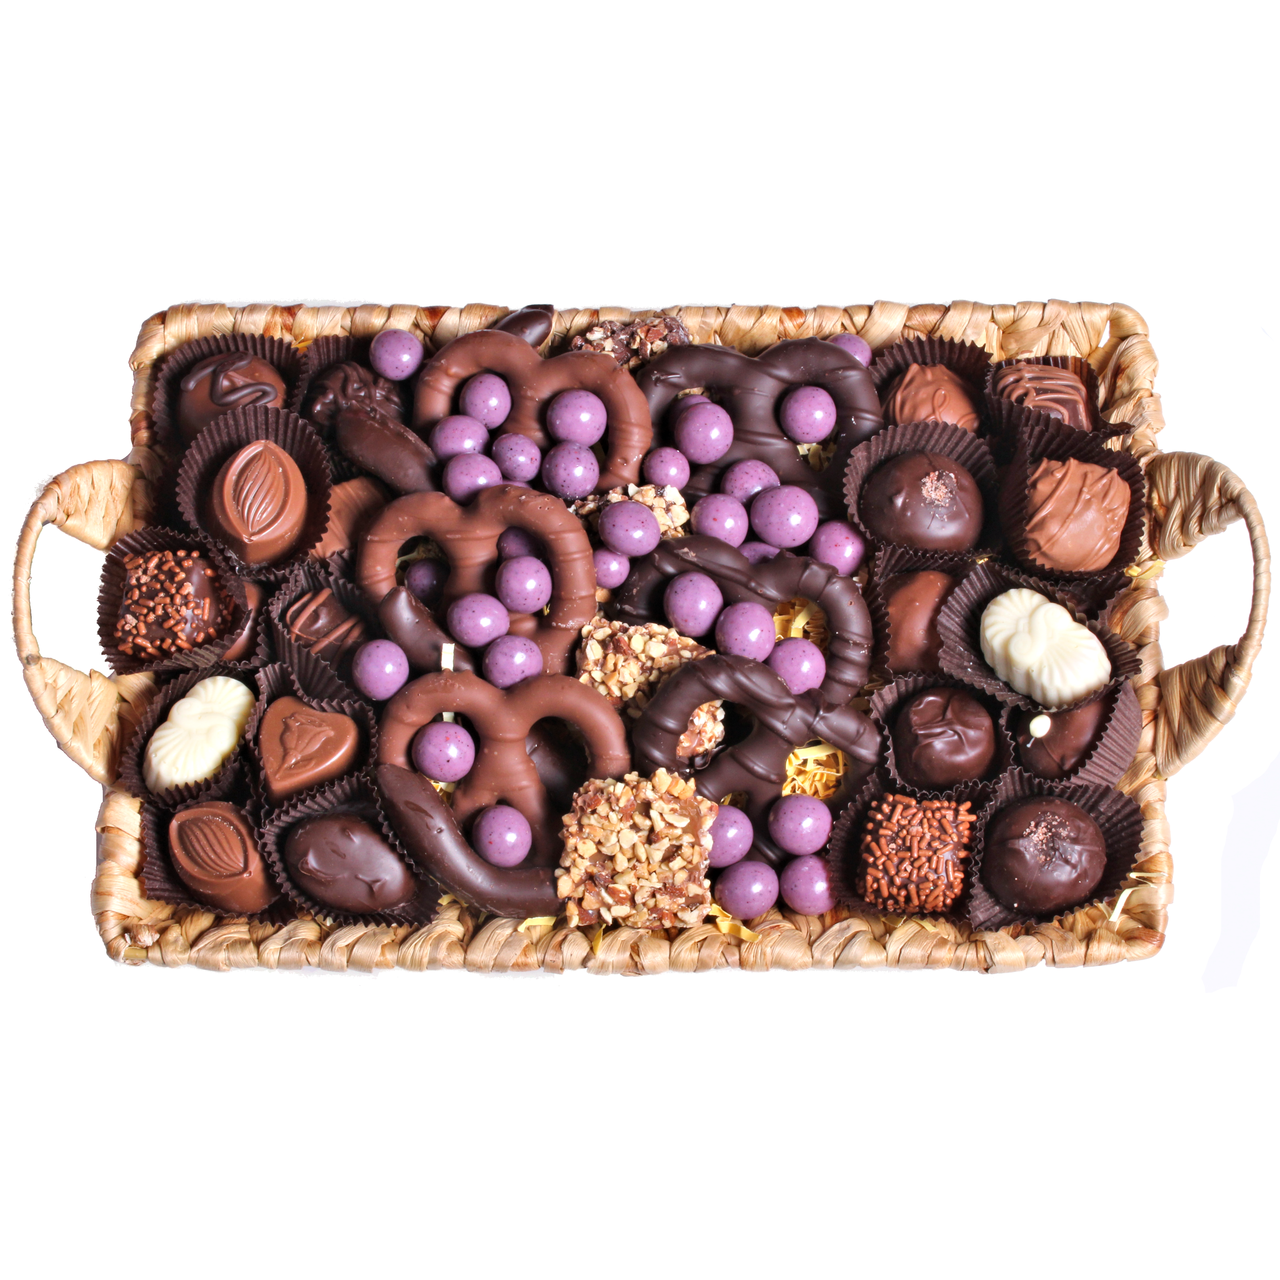 Chocolate Filled Basket Tray